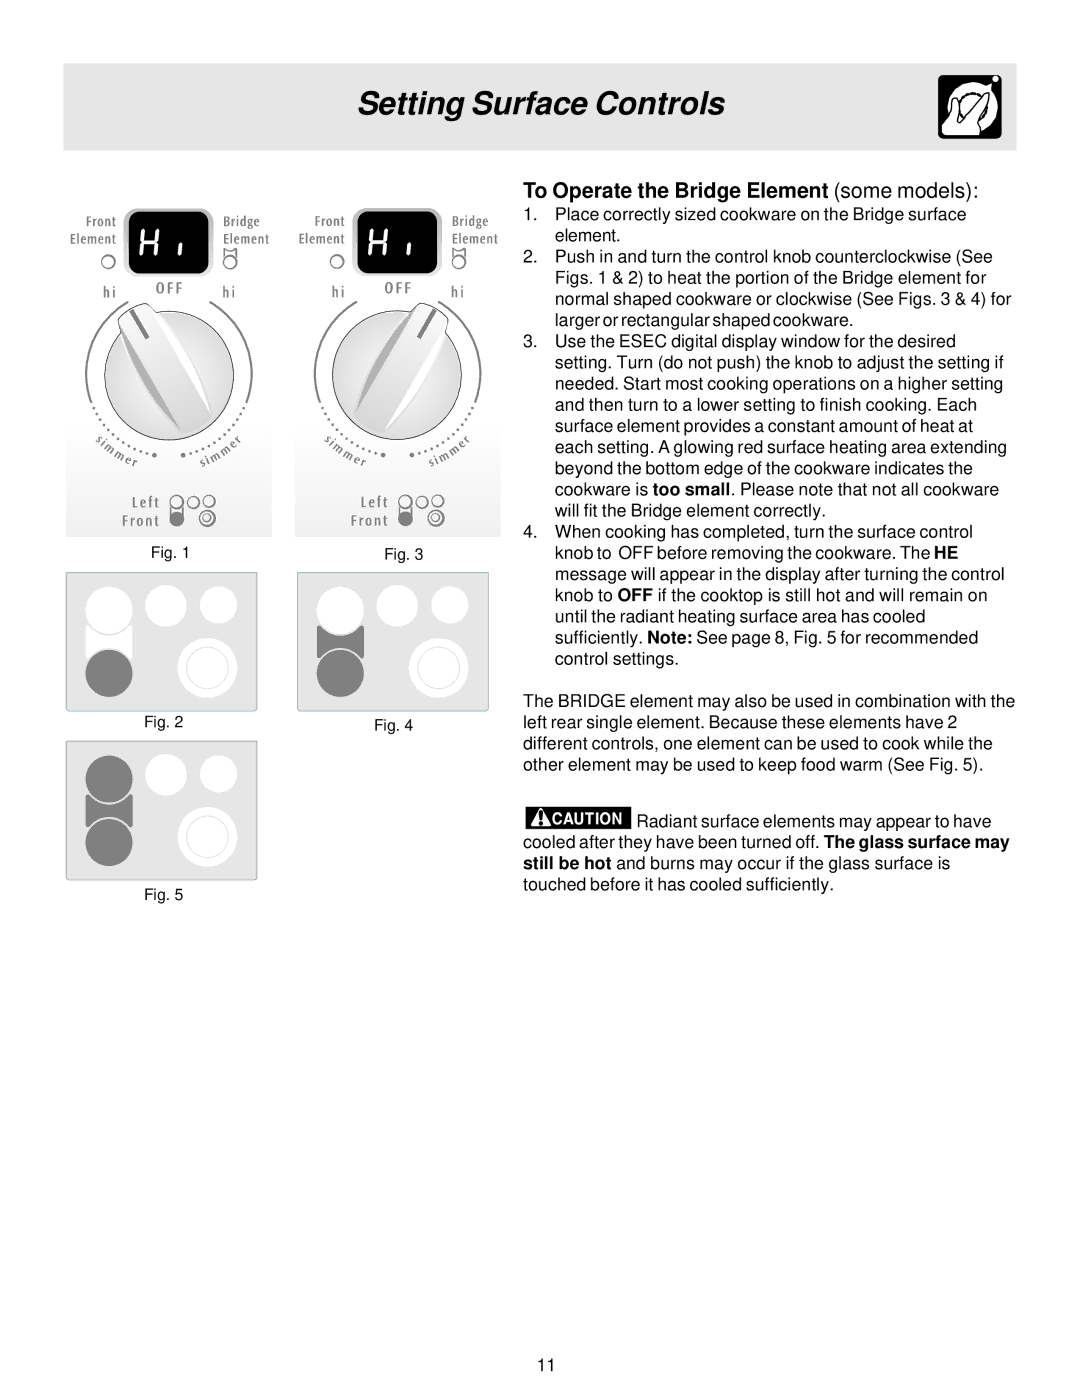 Electrolux ES510 important safety instructions To Operate the Bridge Element some models 